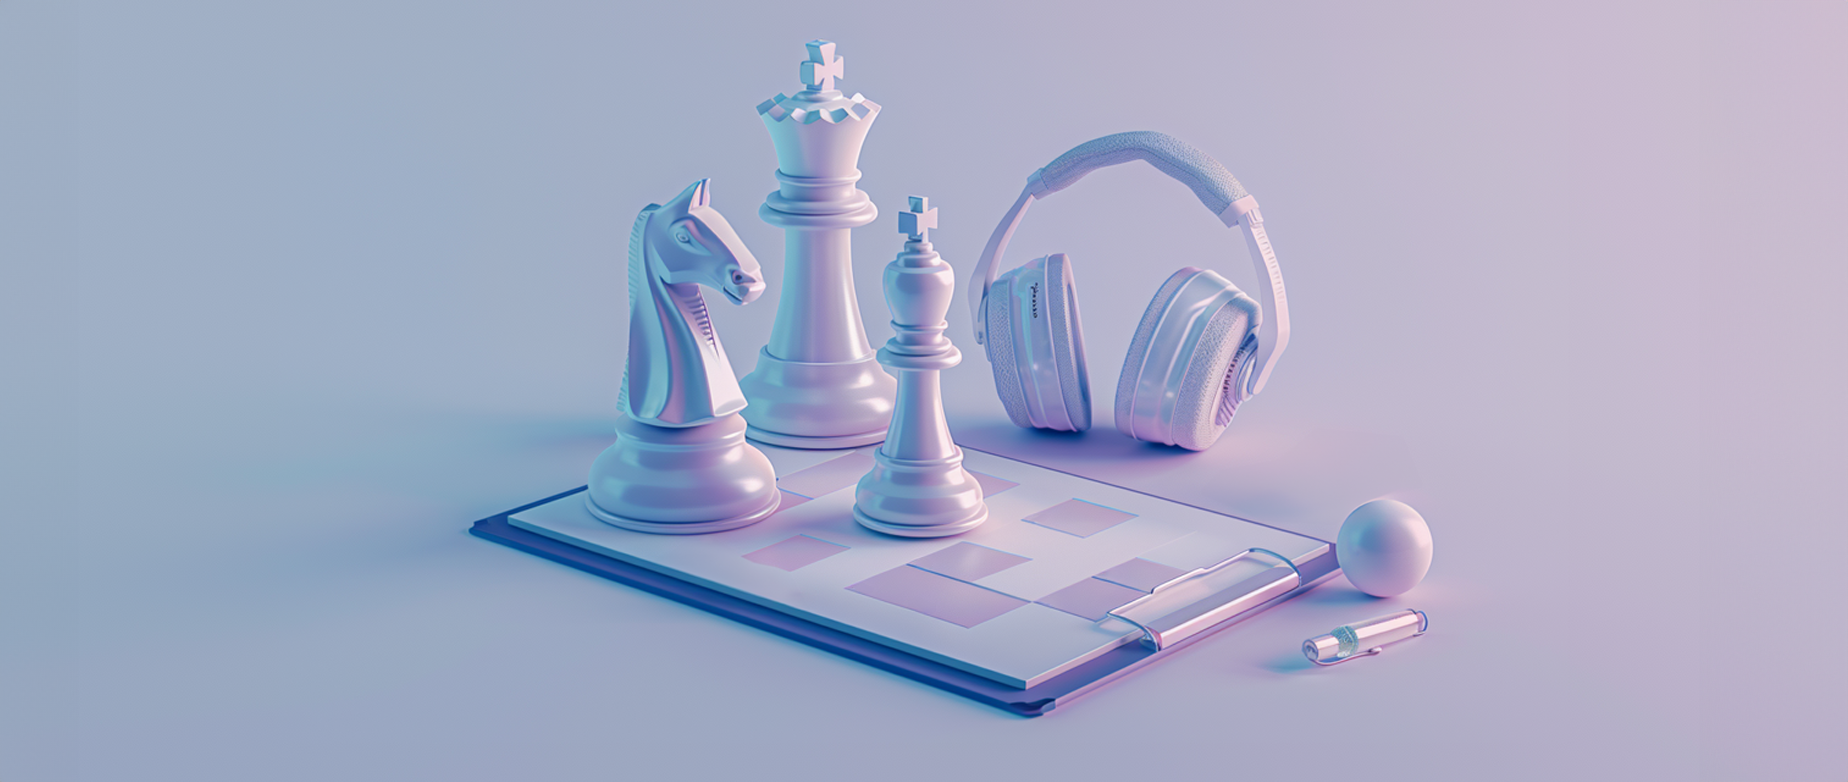 A clipboard chess set with chess pieces and a headset.